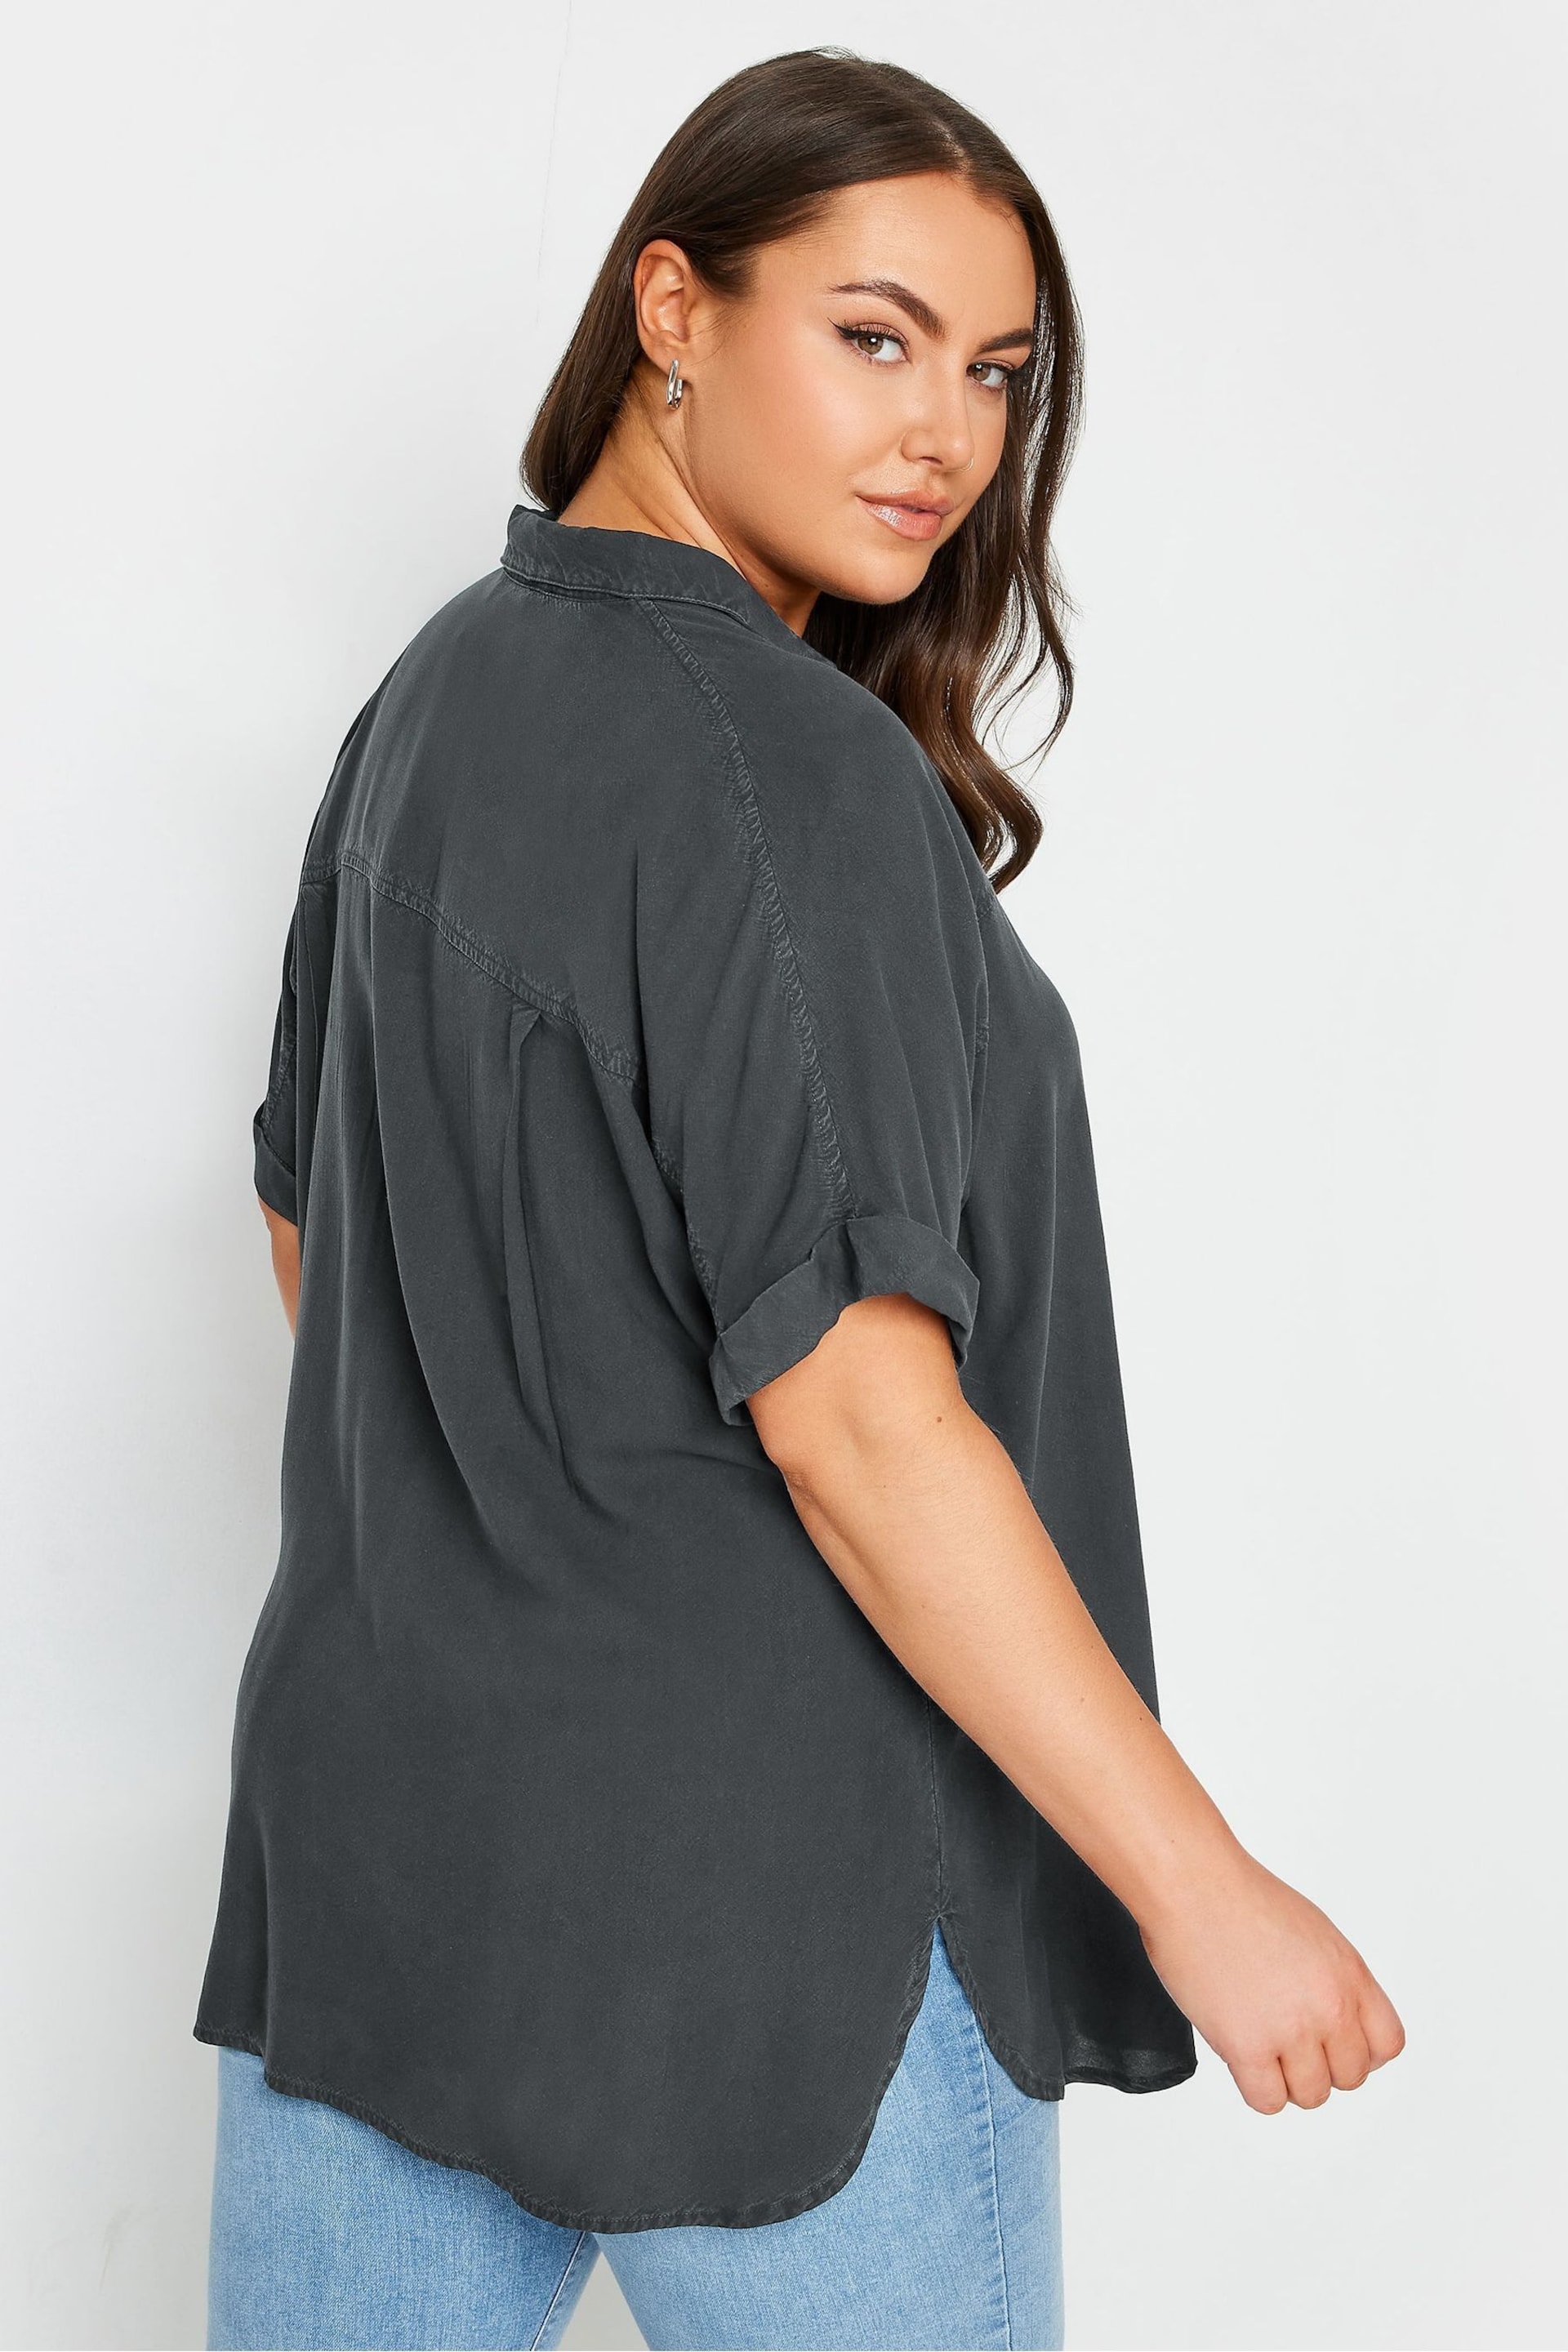 Yours Curve Black Chambray Shirt - Image 3 of 4